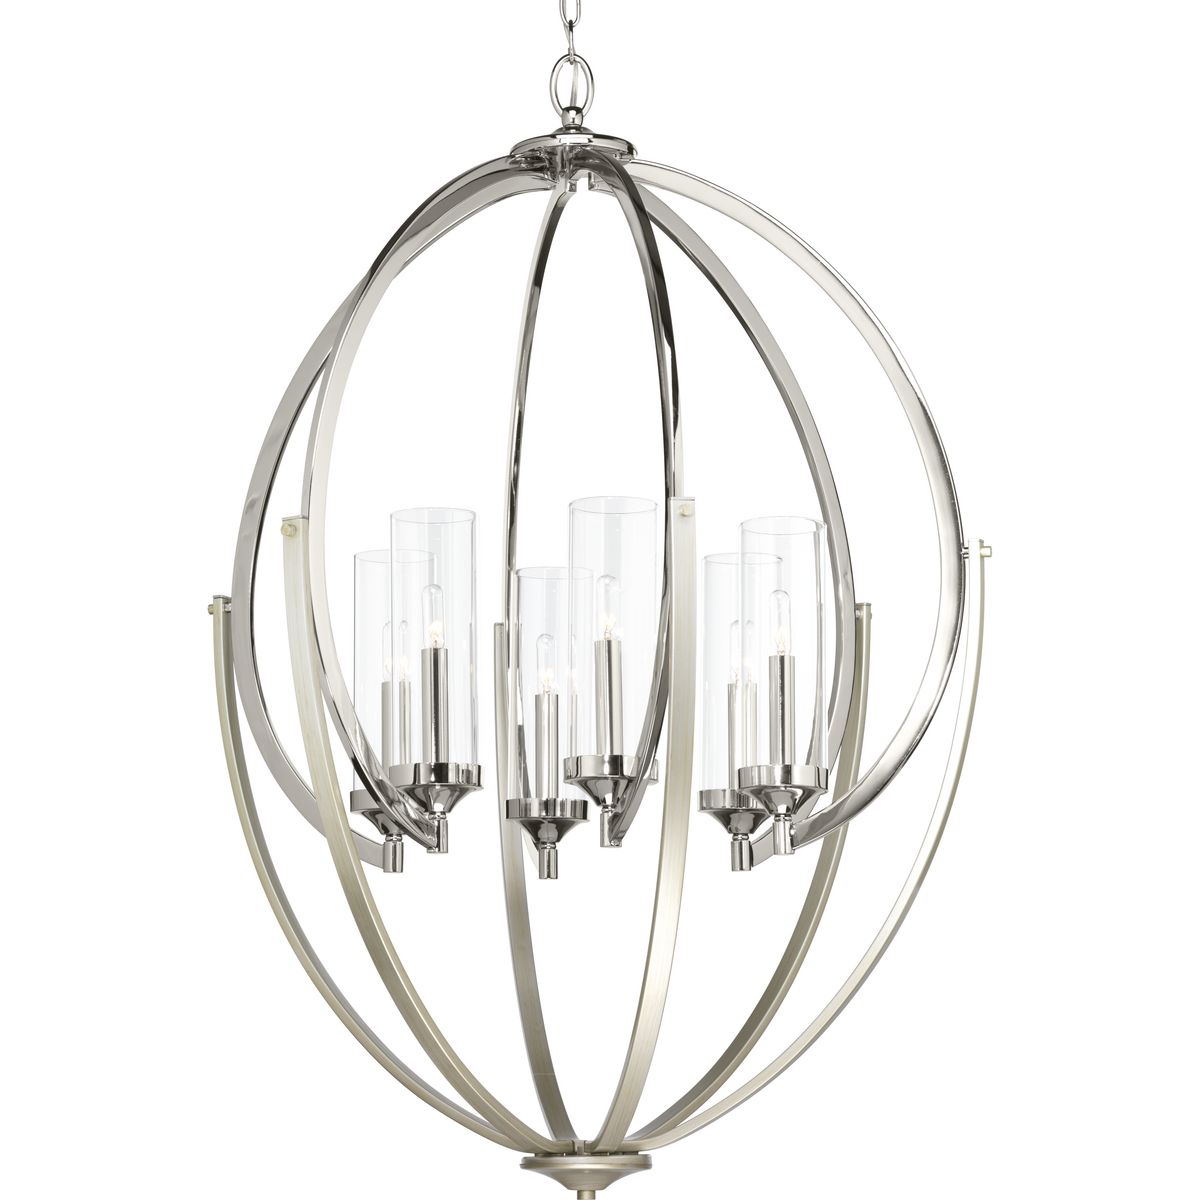 Evoke features an elliptical frame that gracefully supports a candelabra with clear glass shade. Mixed finished highlight the unique shape and provide a hint of livable luxury to your home. This six-light chandelier with Polished Chrome finish and Silver Ridge accents is part of our Design Series collections.